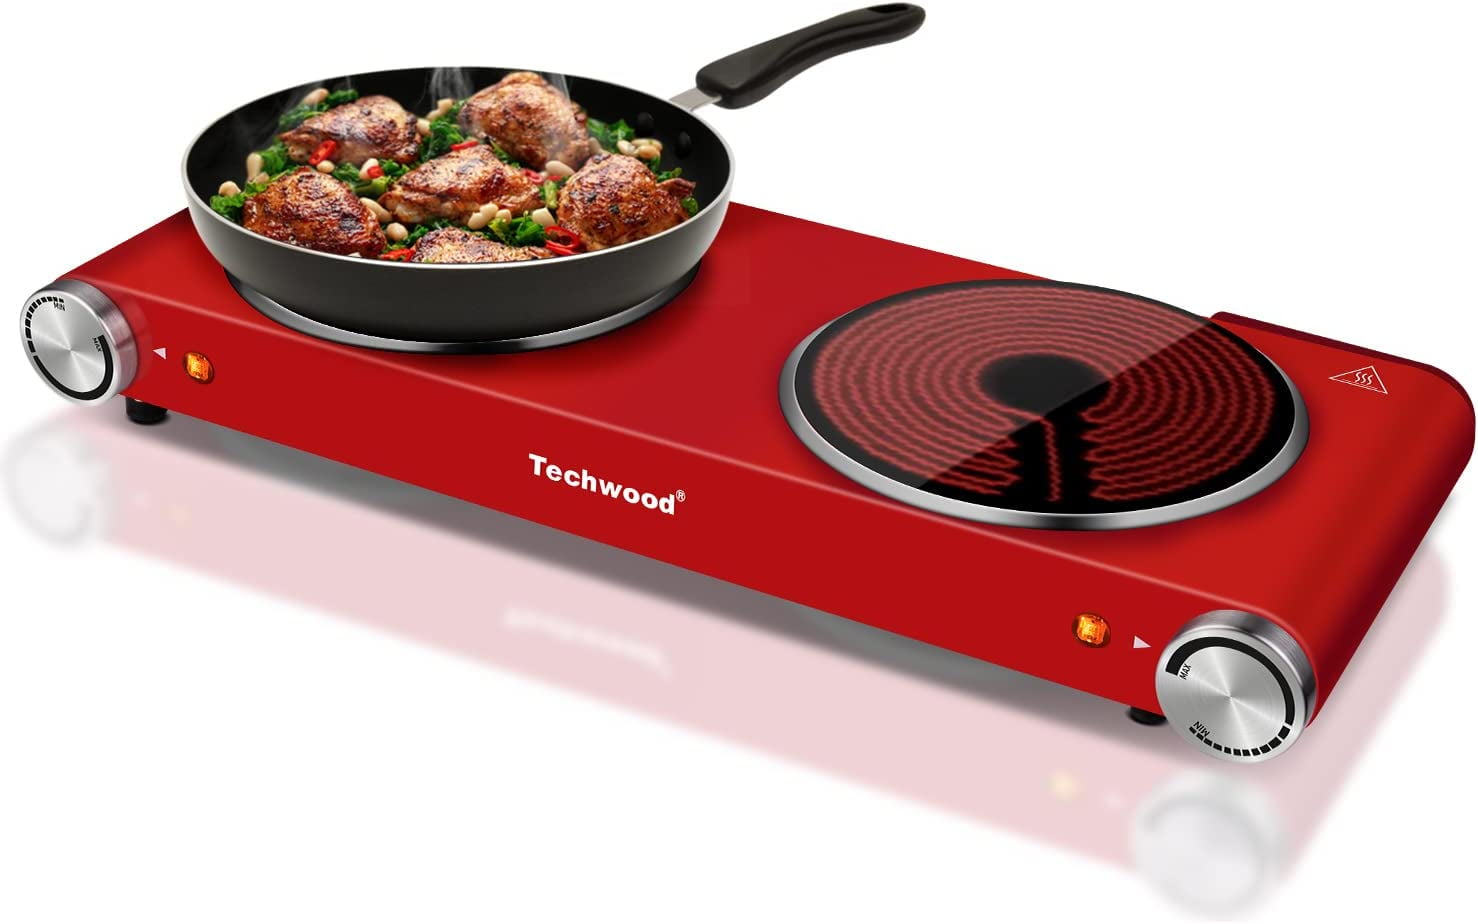 Hot Plate, Techwood Single Burner for Cooking, 1200W Macao